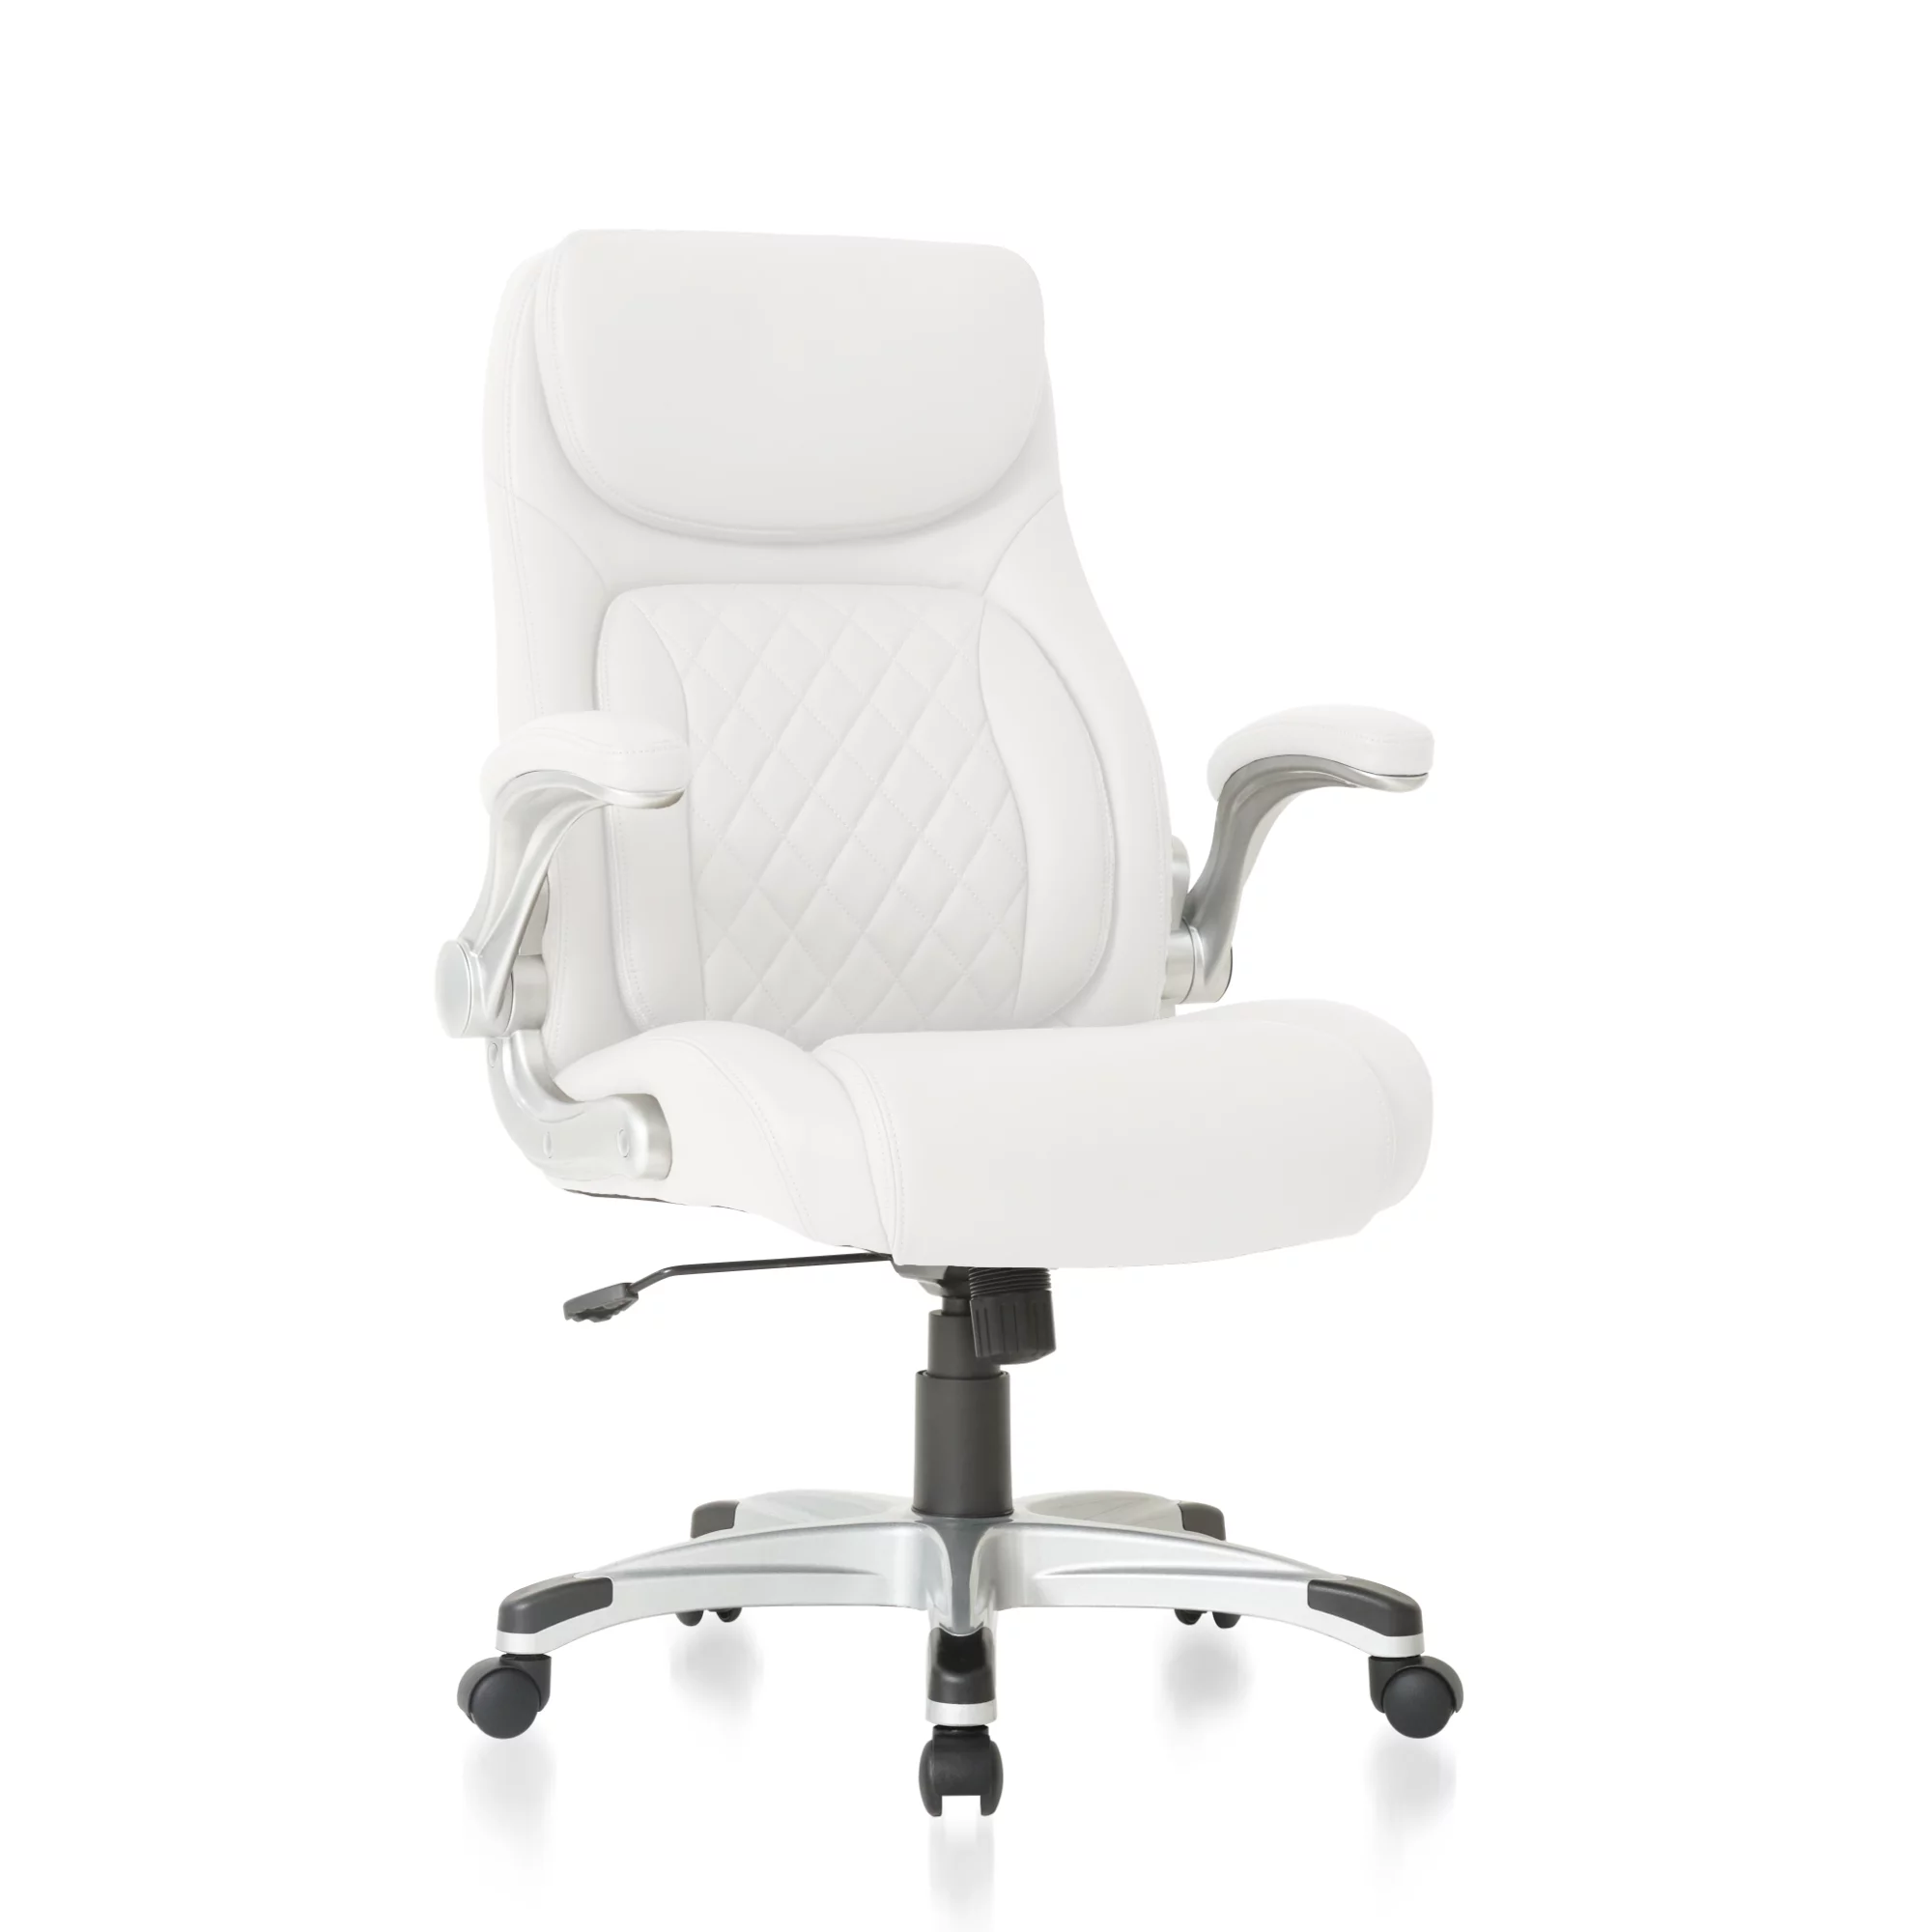 Nouhaus PU Leather Office Chair